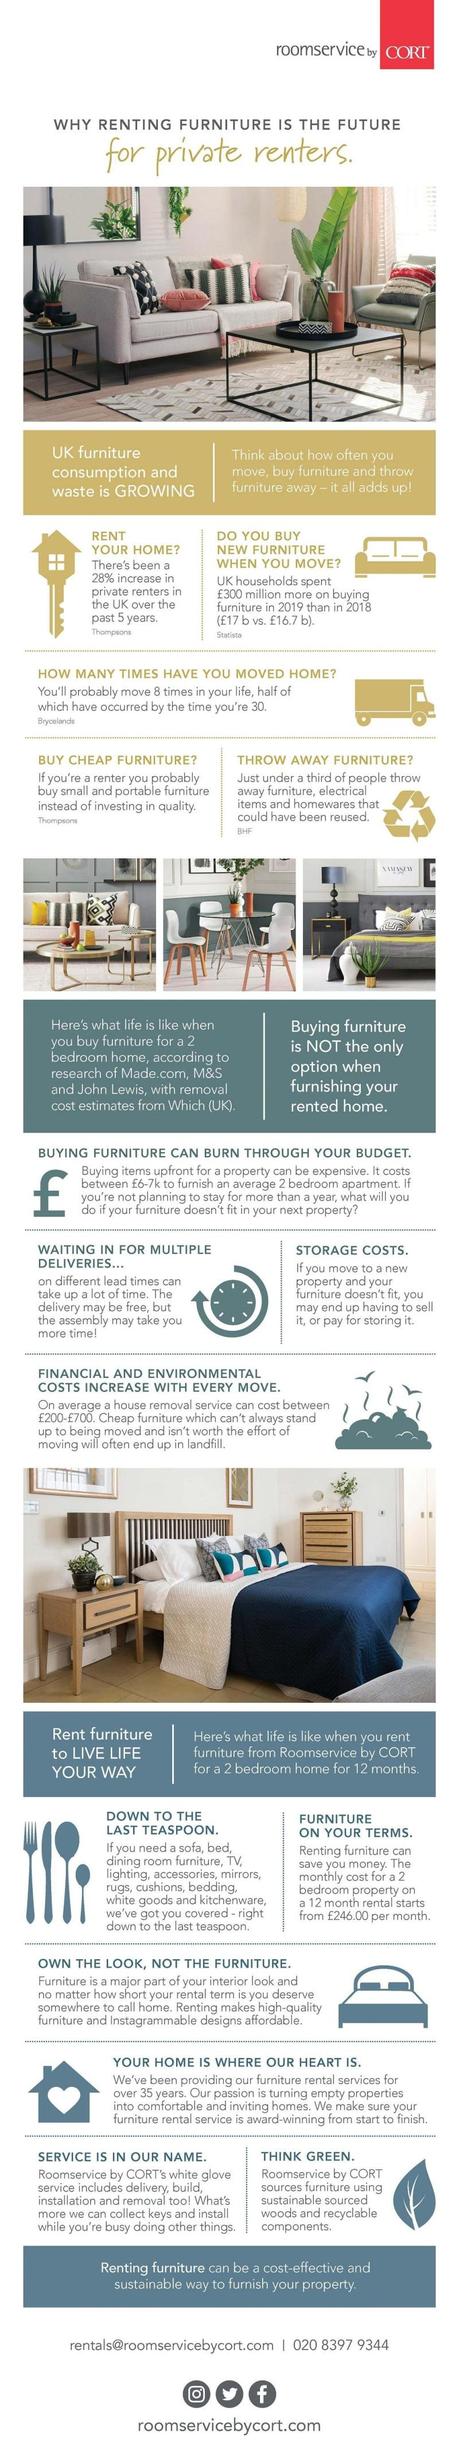 9 Ways to Furnish Your Home Sustainably on a Budget